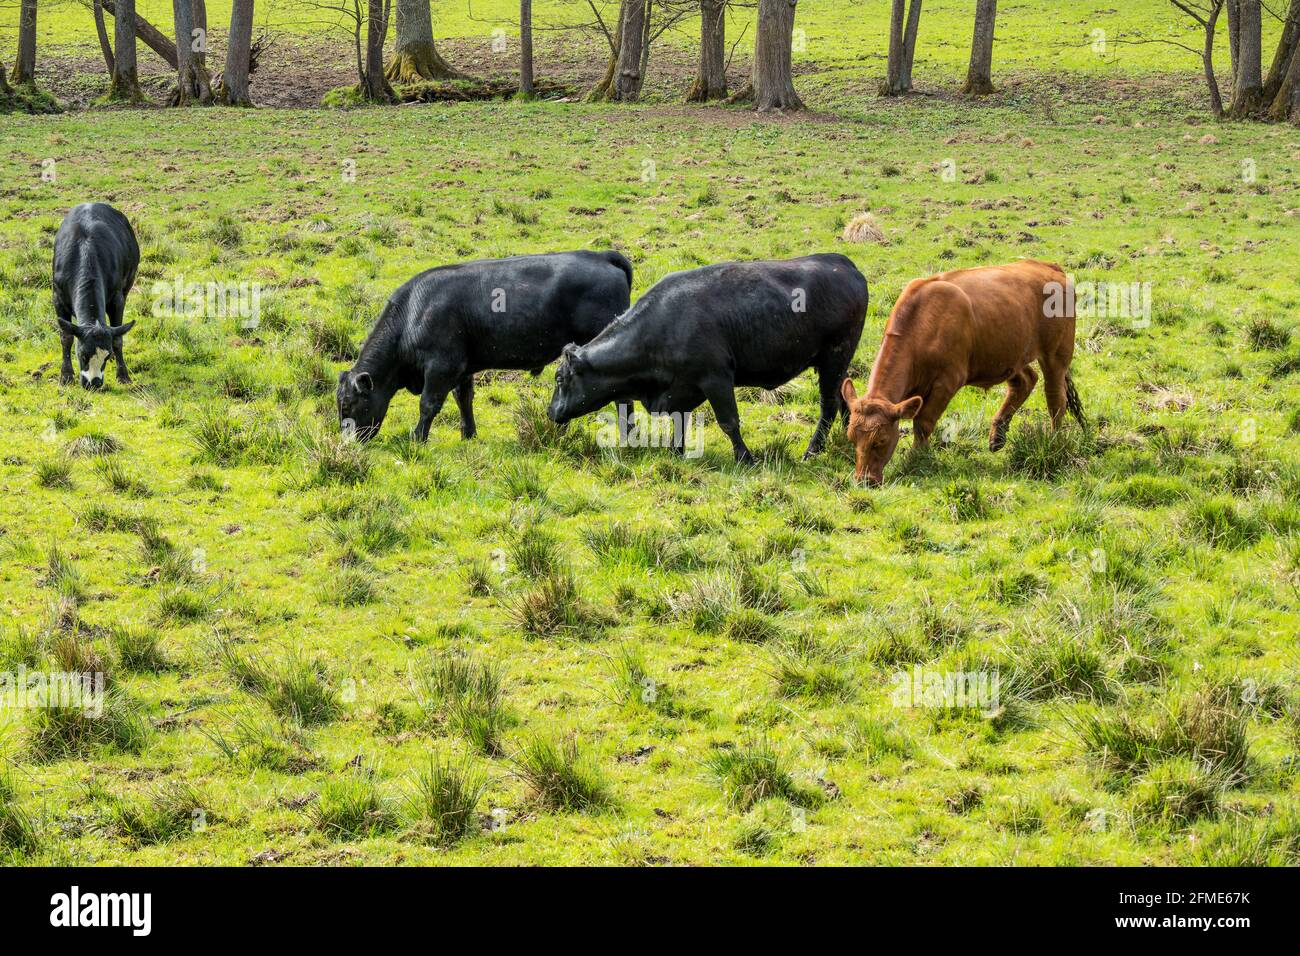 happy cows are allowed to grow out in natural environment, species-appropriate, animal welfare Stock Photo